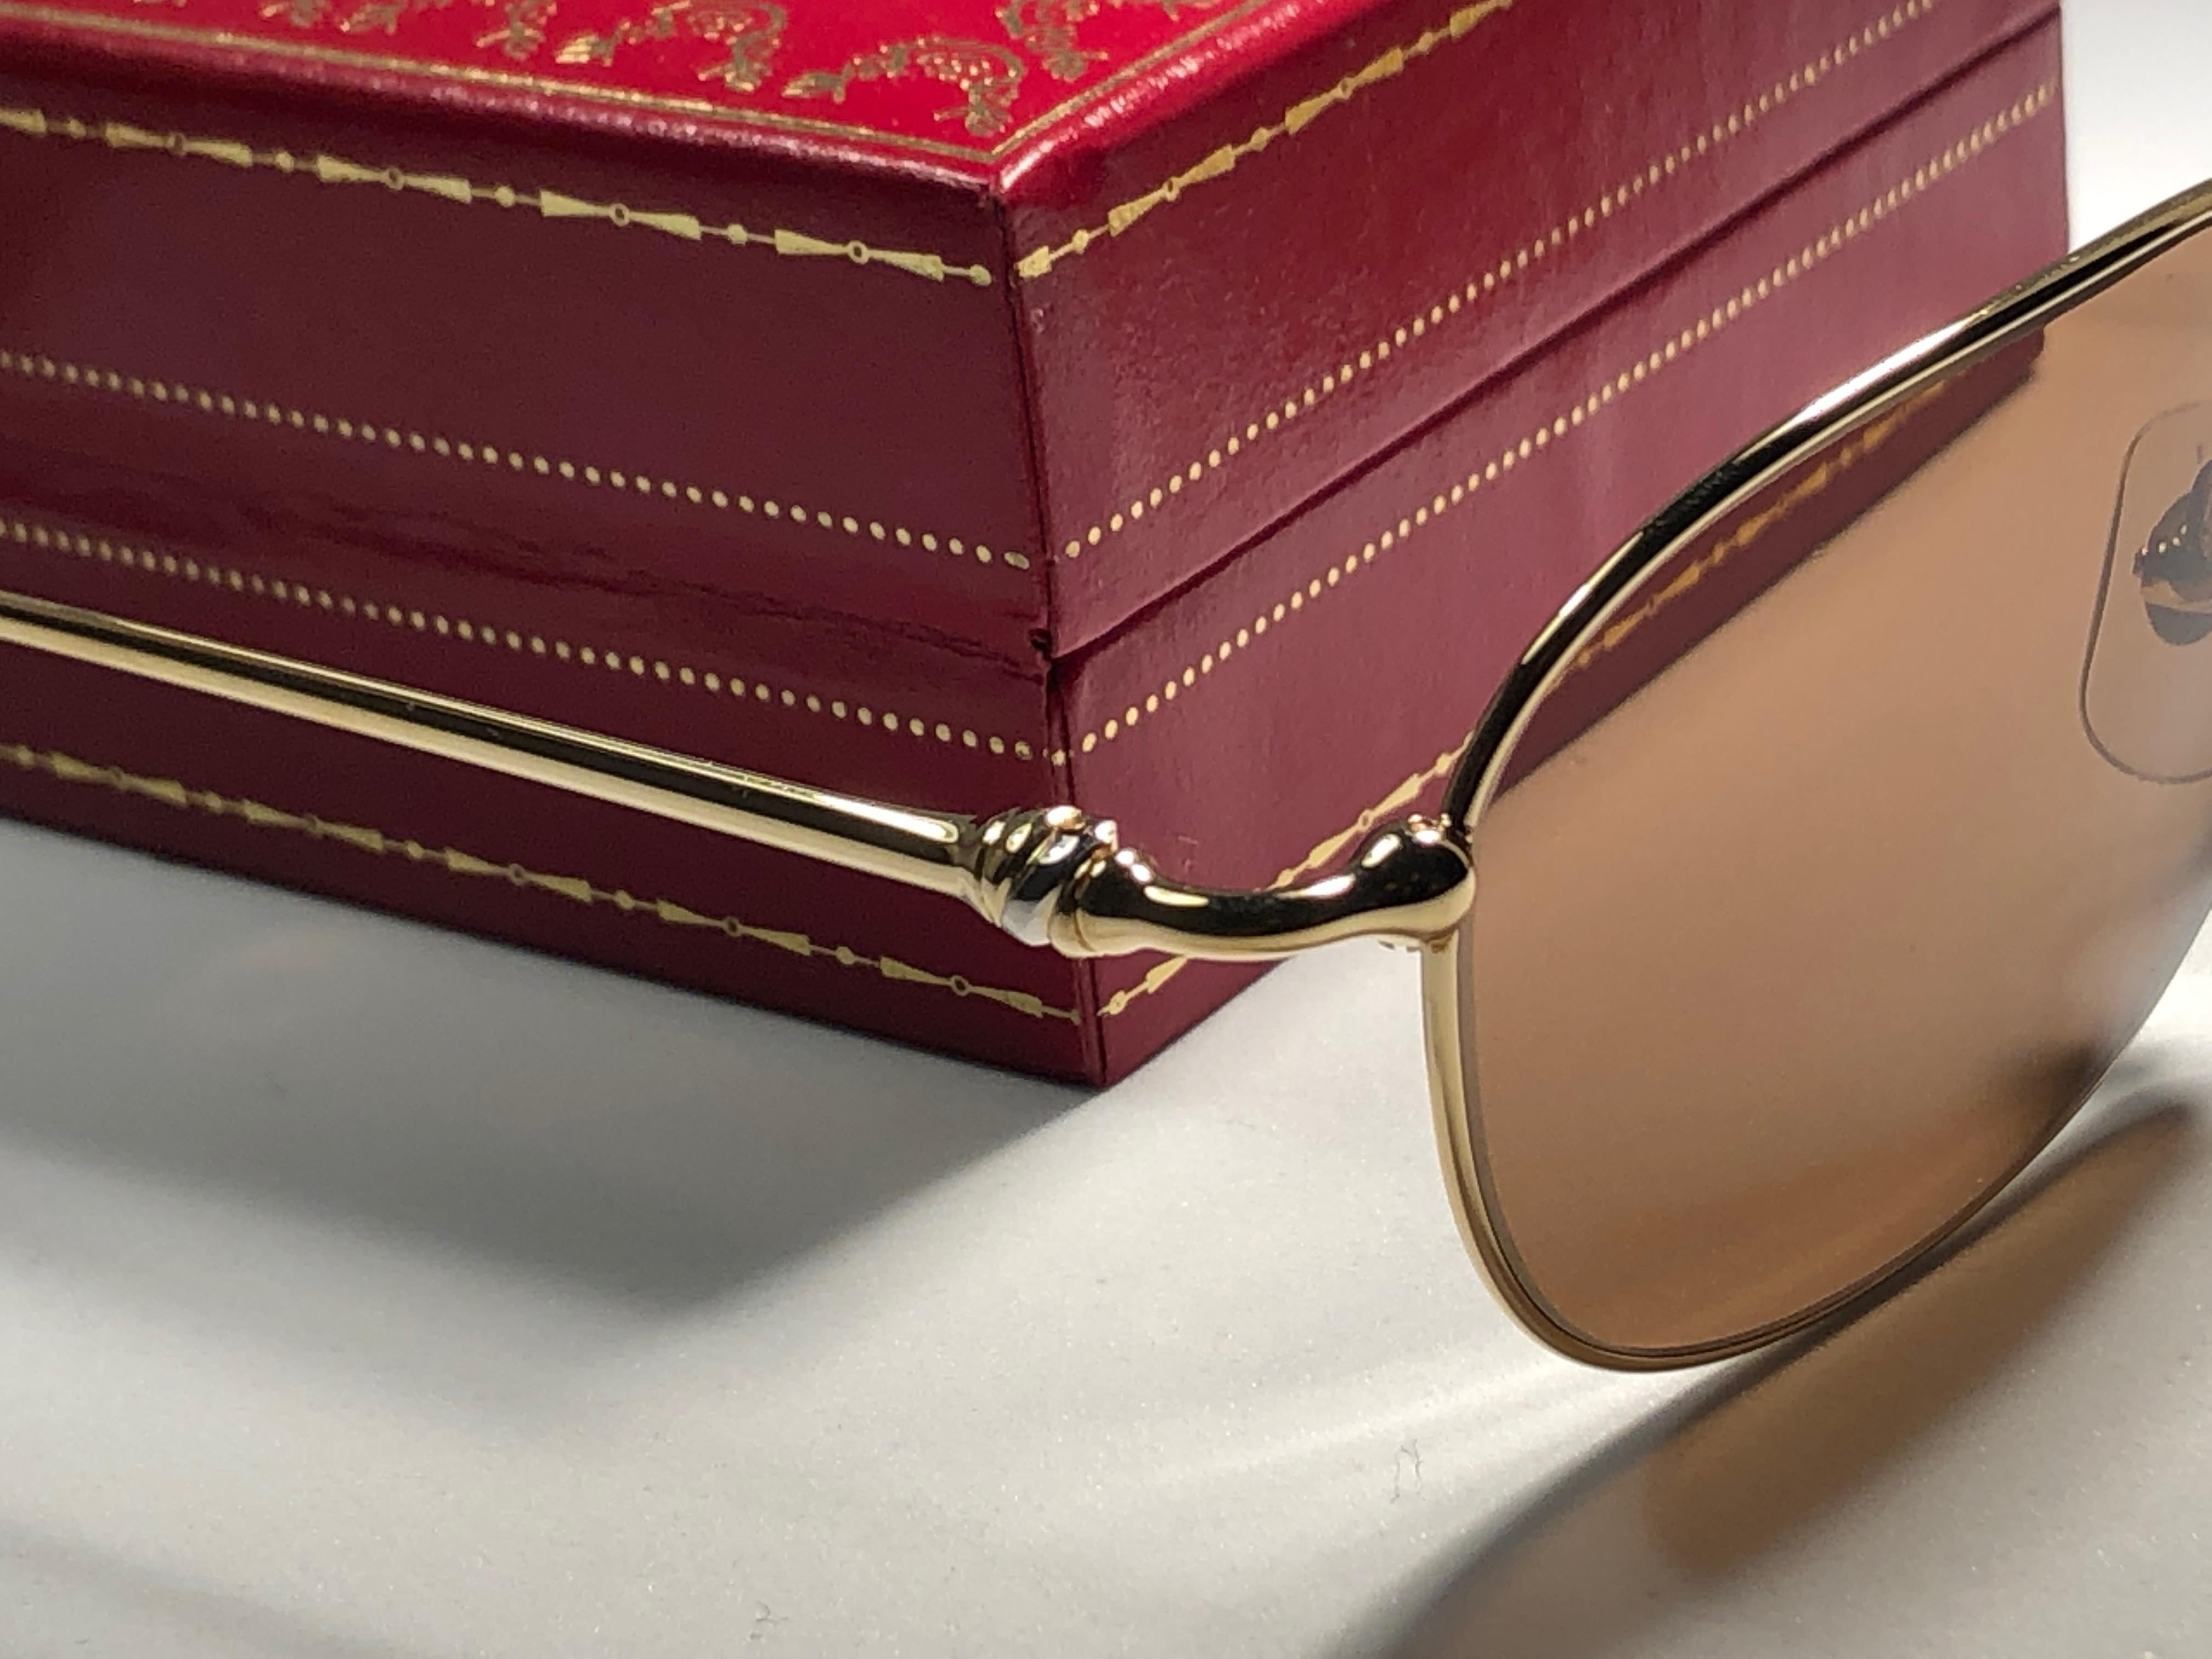 New Vintage Cartier Vesta 56mm Gold Plated Frame France 1990 Sunglasses In New Condition For Sale In Baleares, Baleares